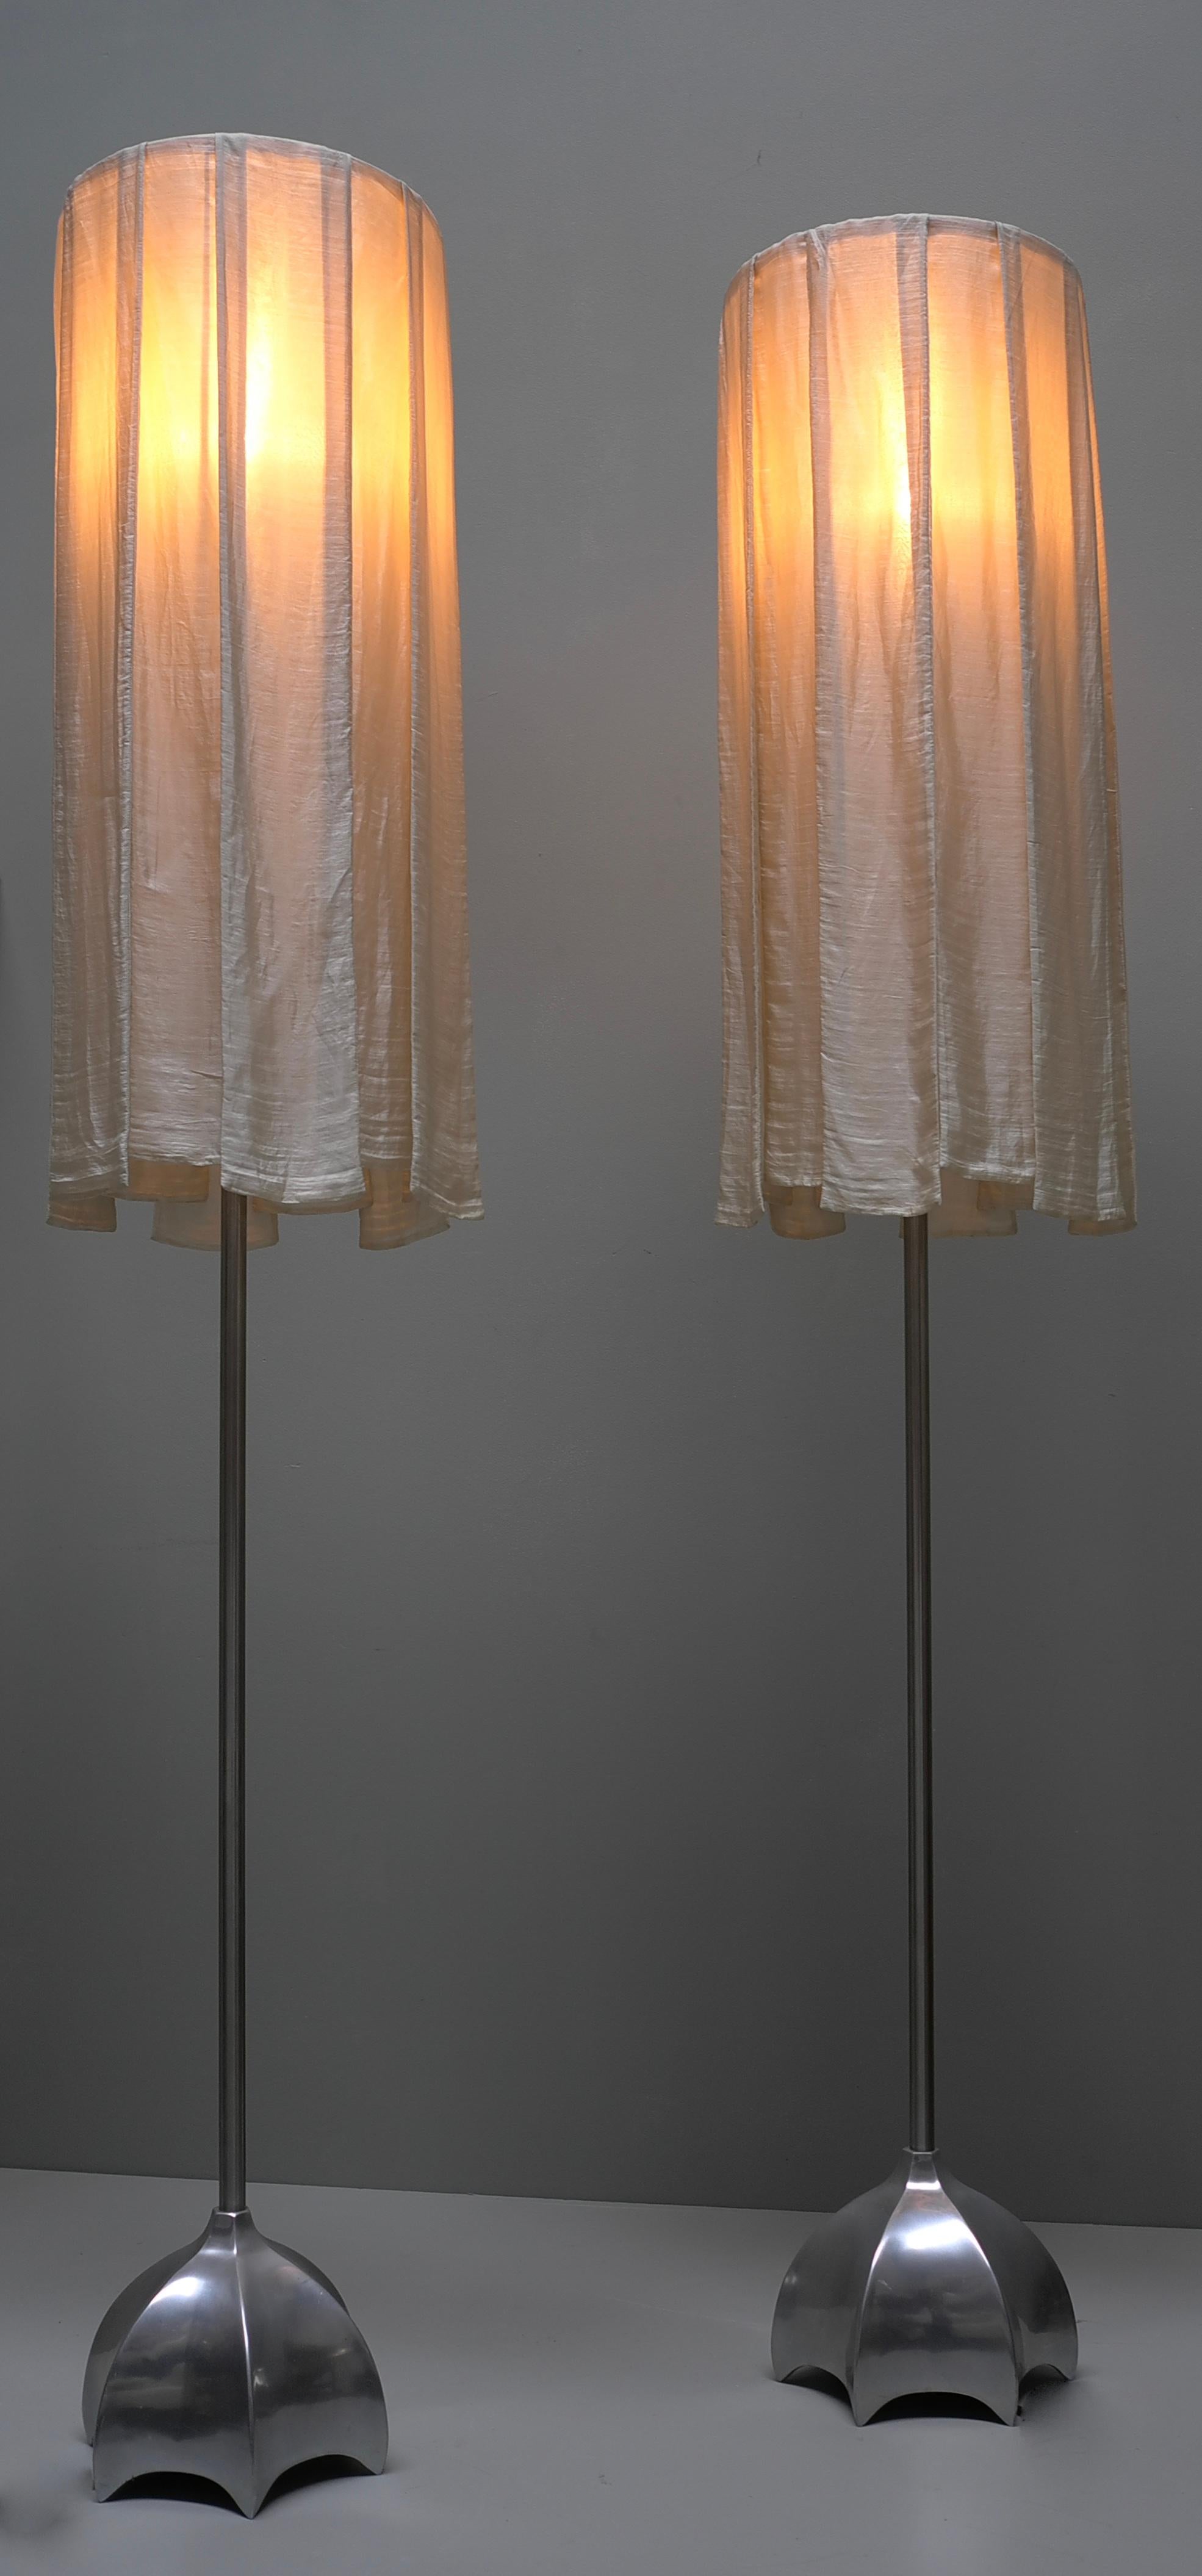 Pair of Sculptural Floor Lamps in Brass with Silk Curtain shades, circa 1980 For Sale 1